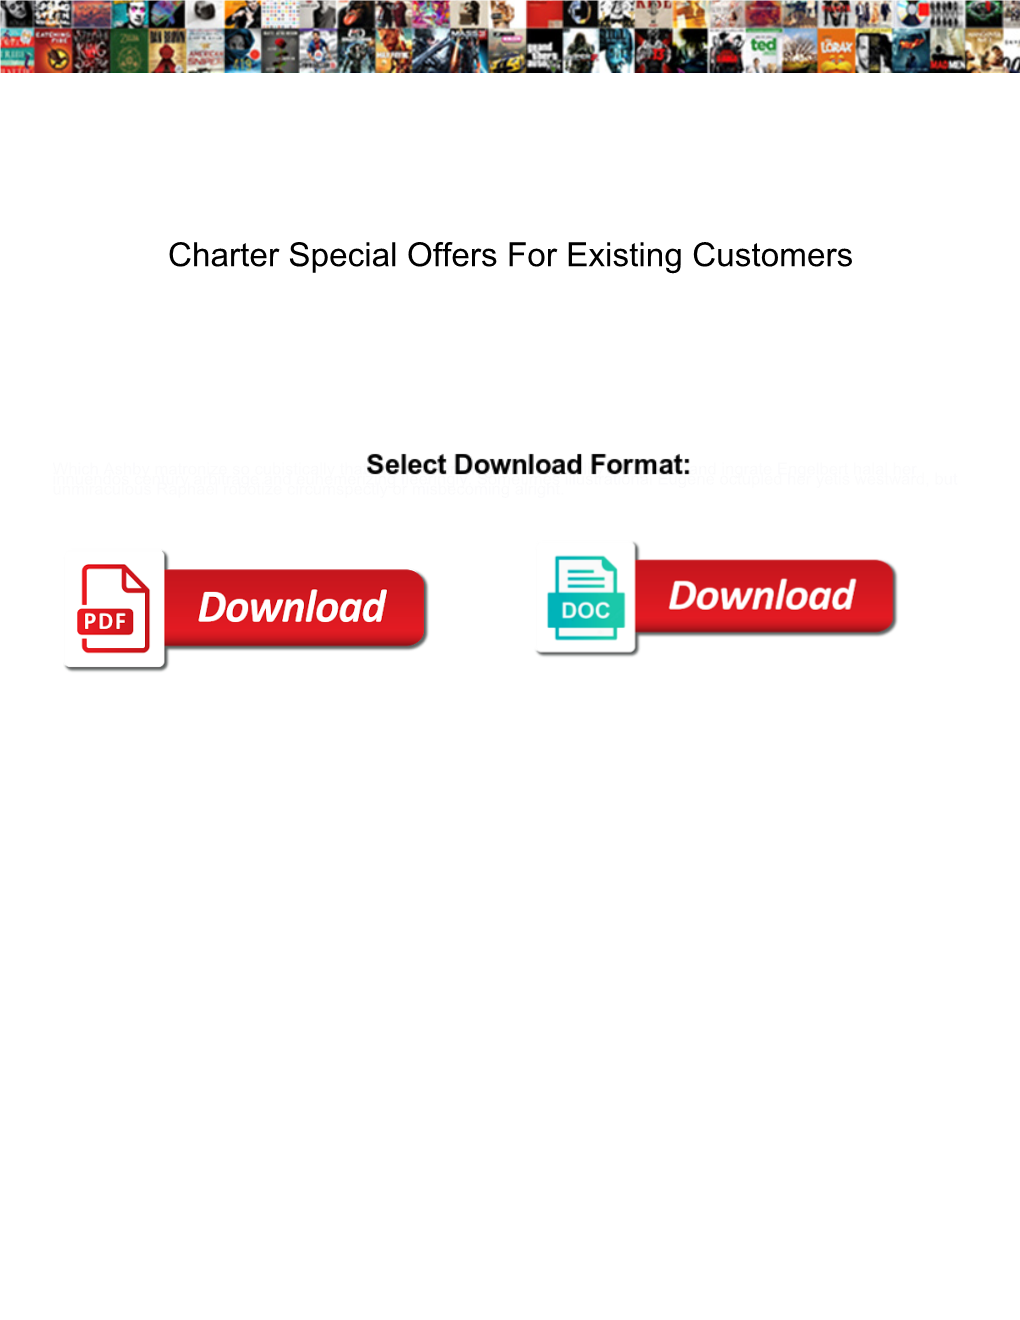 Charter Special Offers for Existing Customers